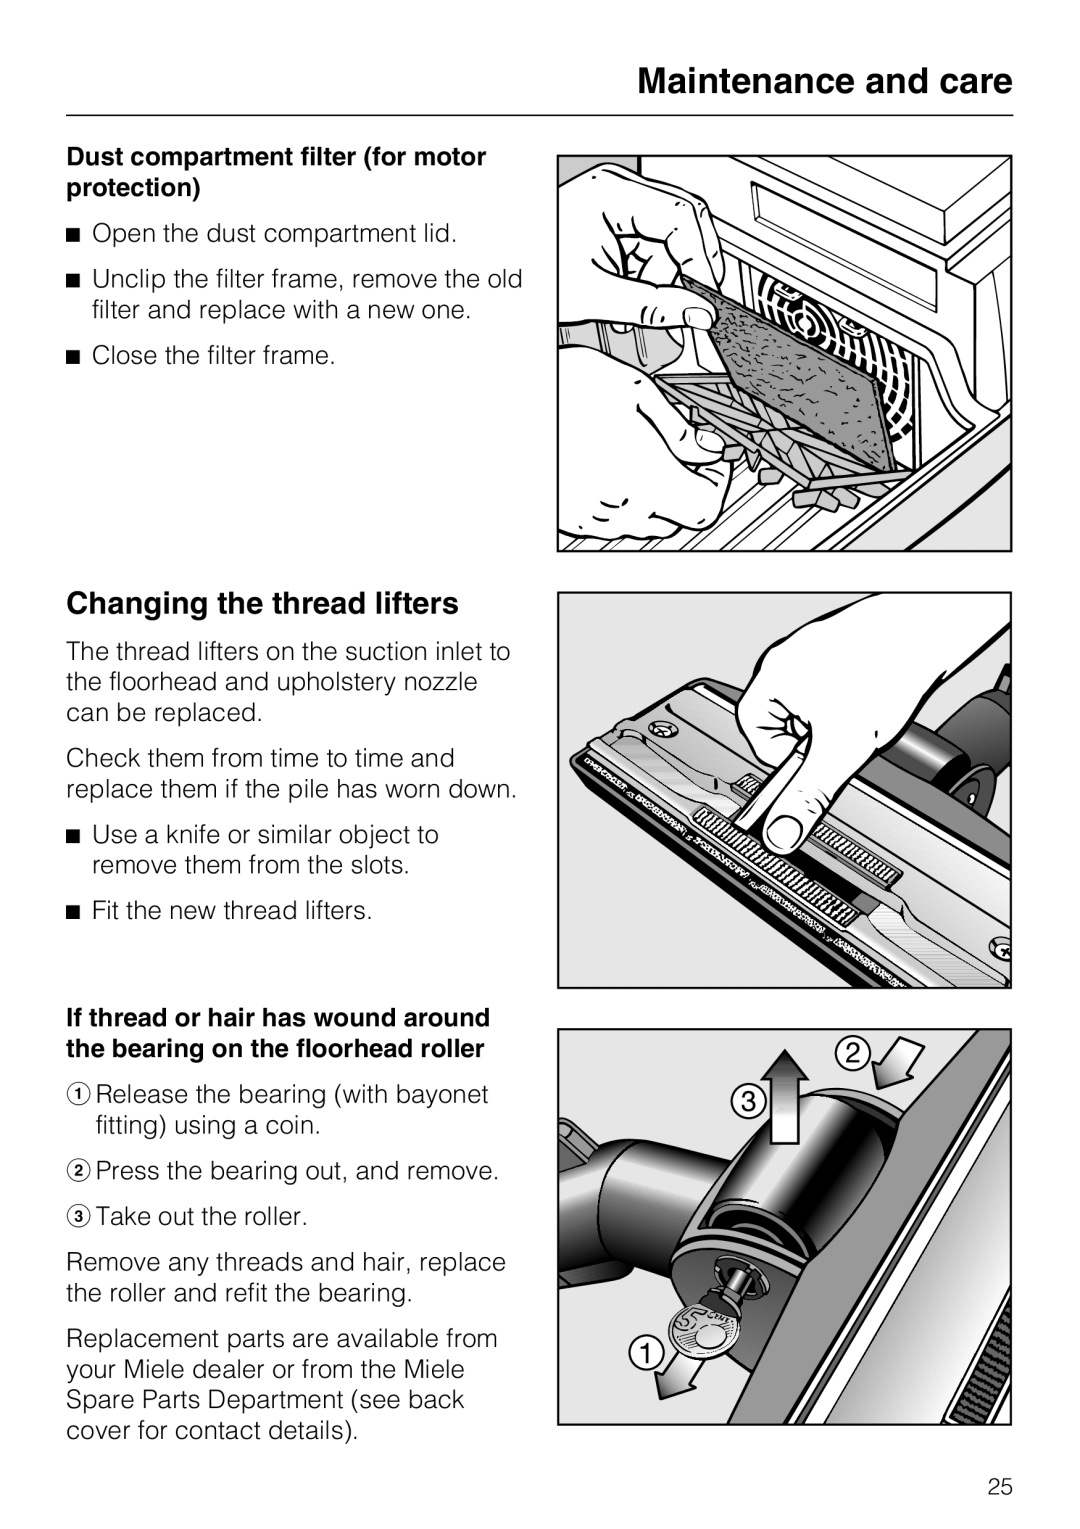 Miele S 388, S 360 manual Changing the thread lifters, Maintenance and care, Dust compartment filter for motor protection 